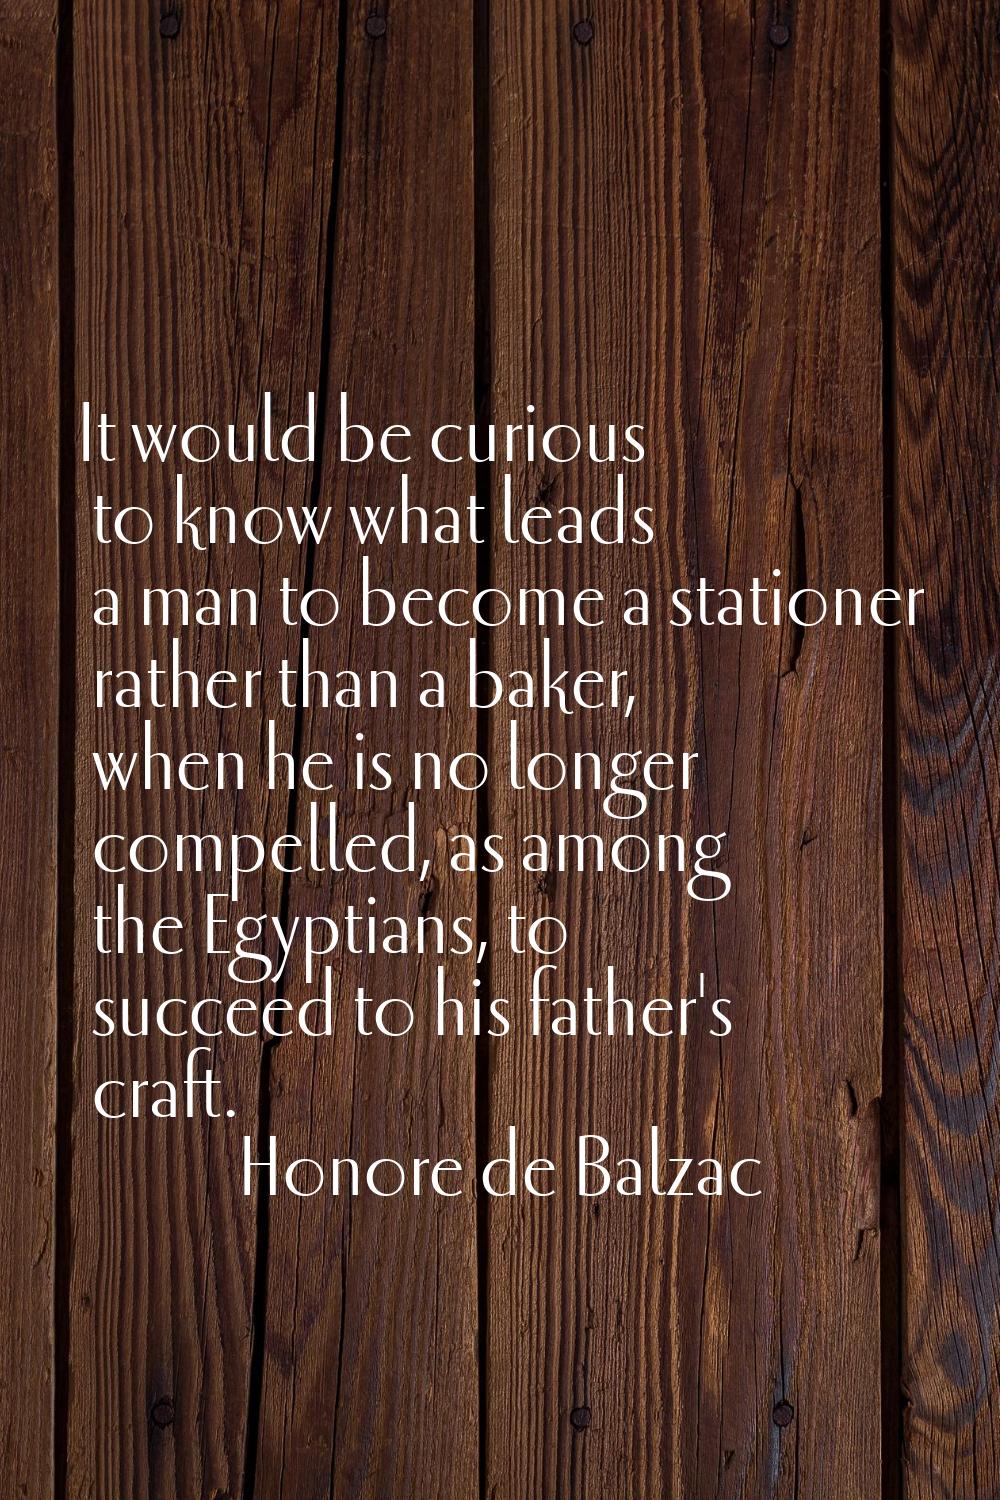 It would be curious to know what leads a man to become a stationer rather than a baker, when he is 